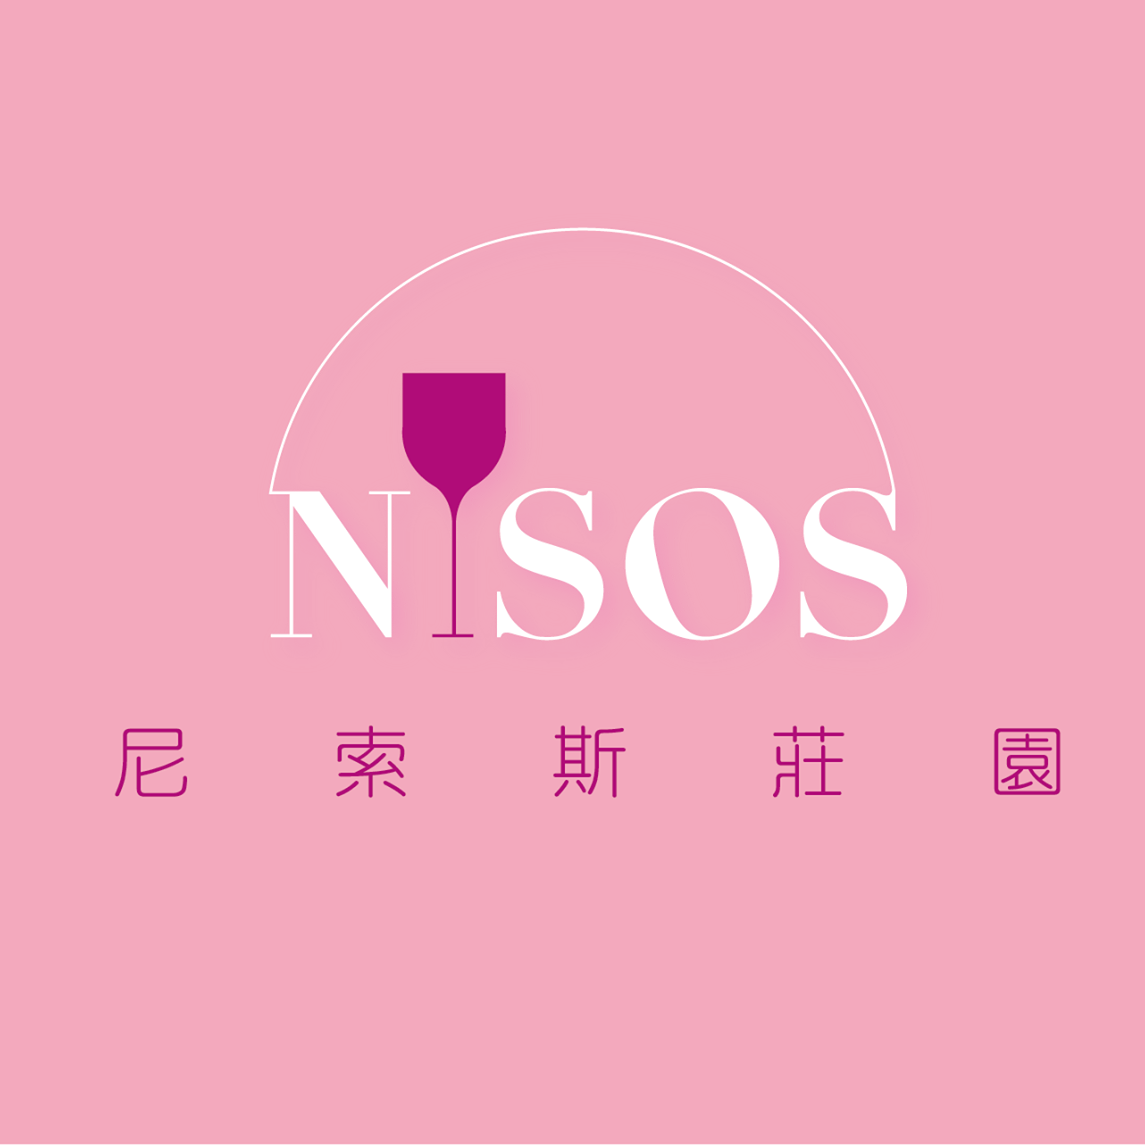 You are currently viewing Nysos Enterprise Co. Ltd